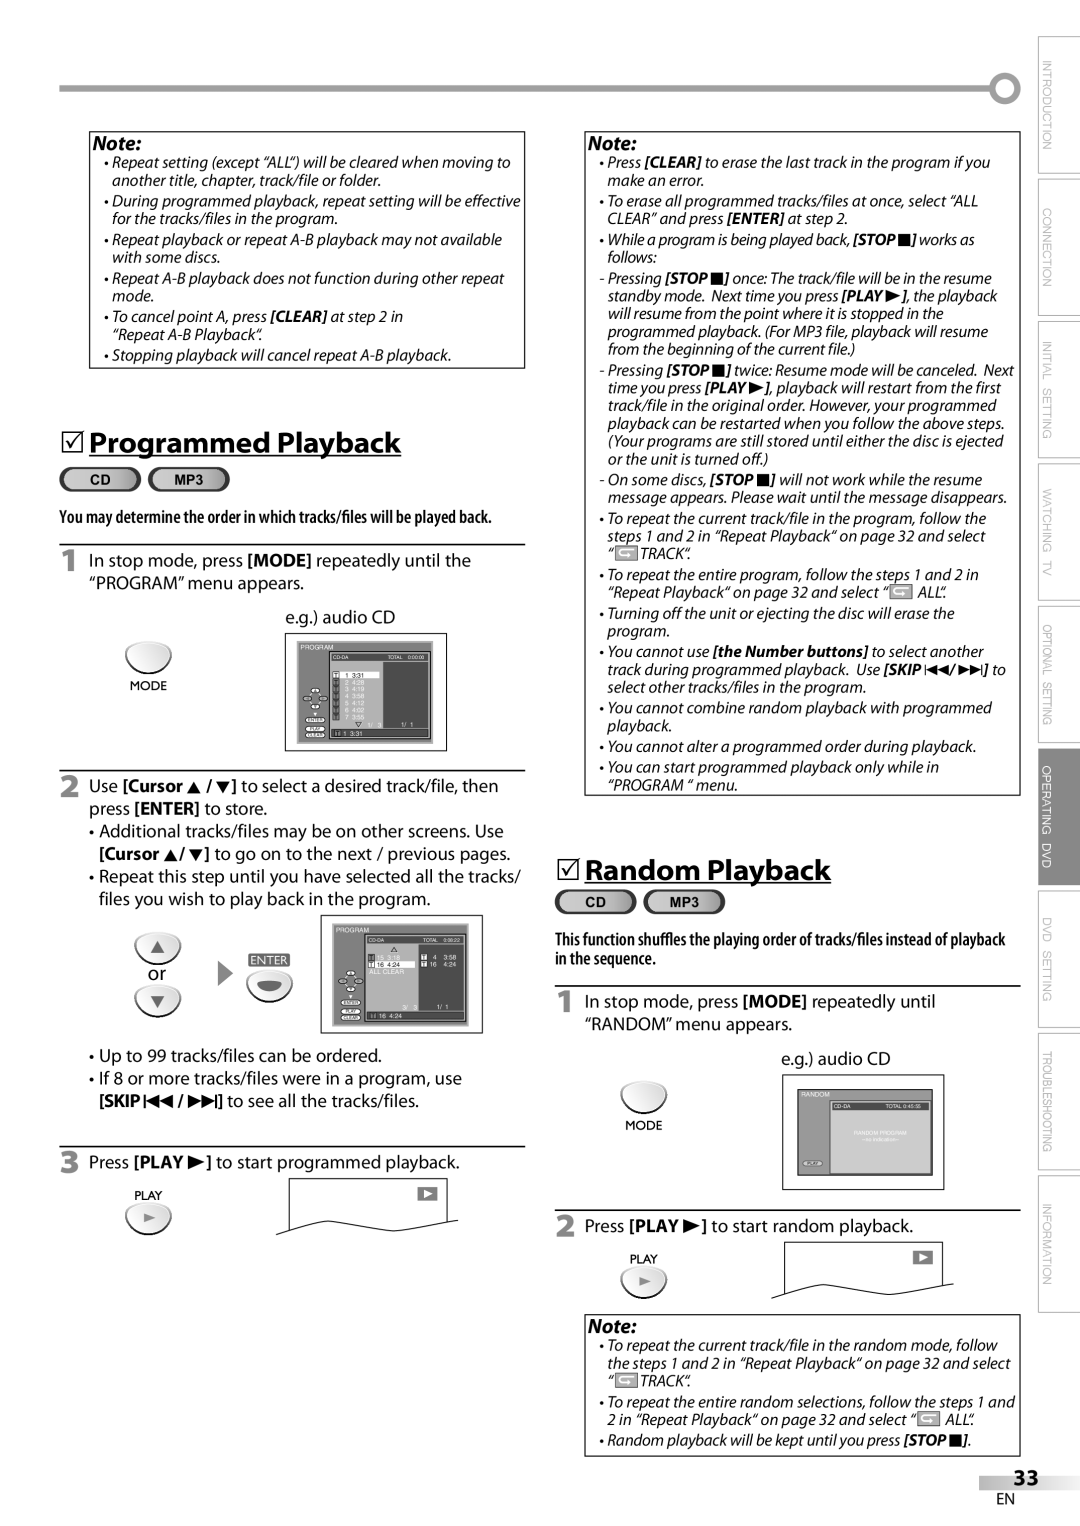 Sylvania LD200SL8 owner manual 5Programmed Playback, 5Random Playback, in the sequence 